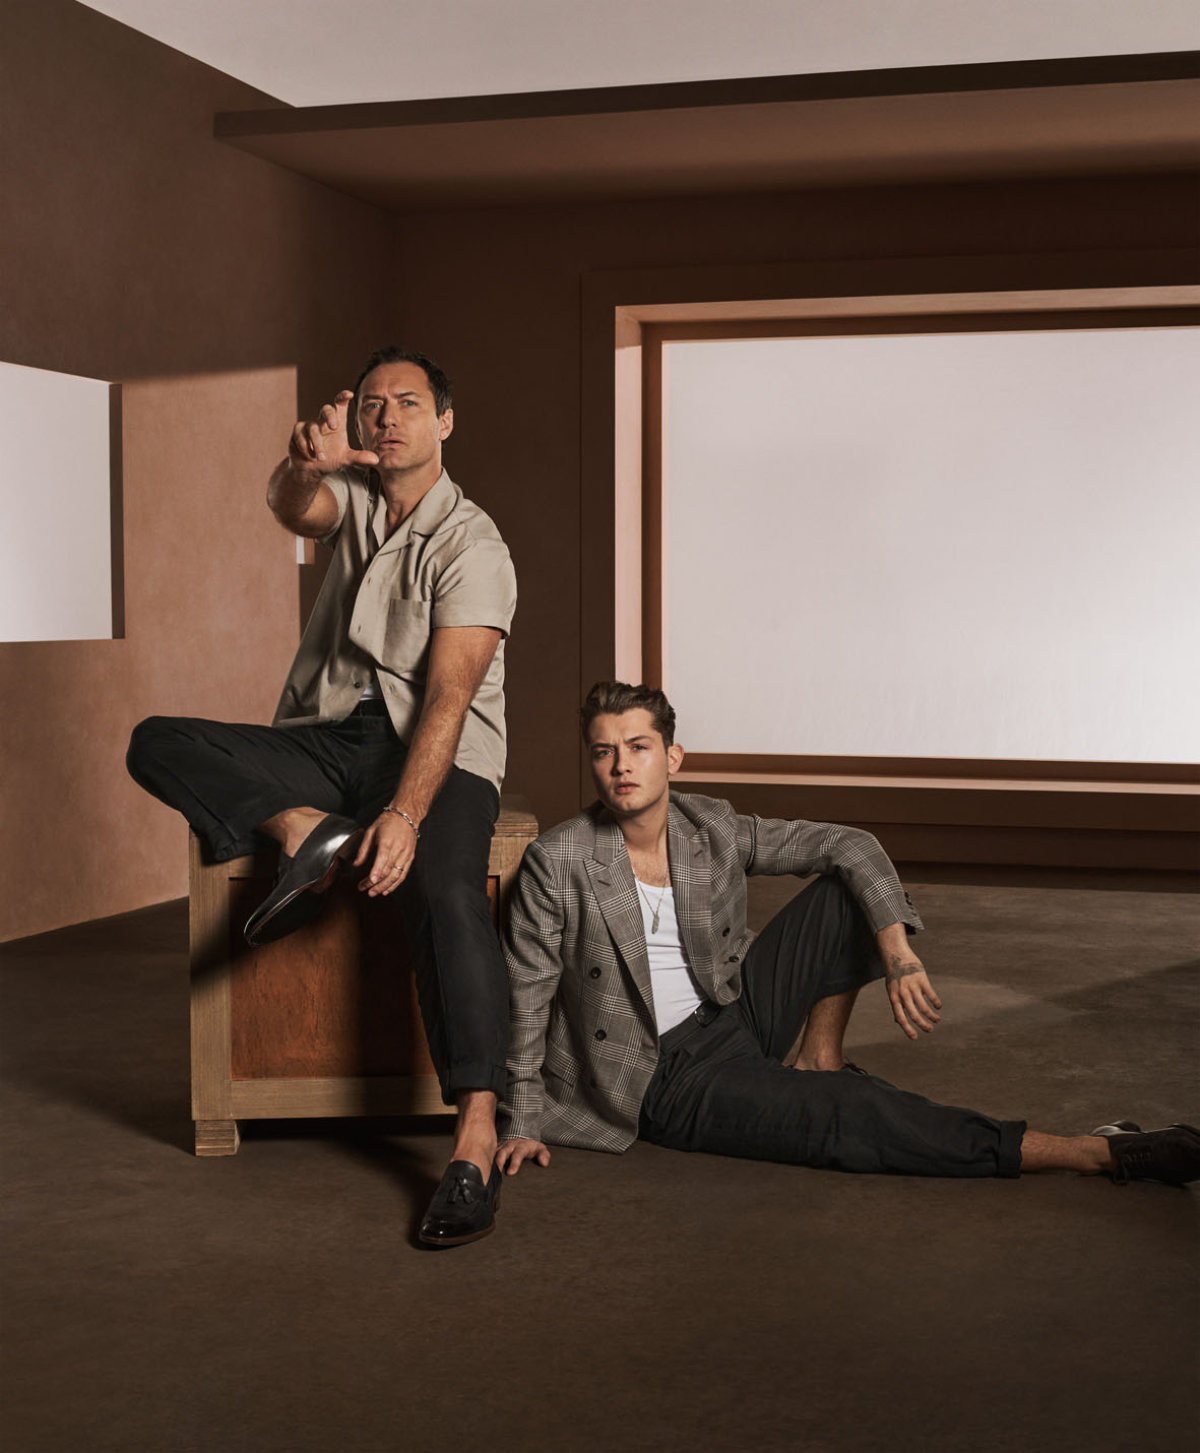 Brioni Introduces New Spring/Summer 2022 Campaign Featuring Jude Law And Raff Law